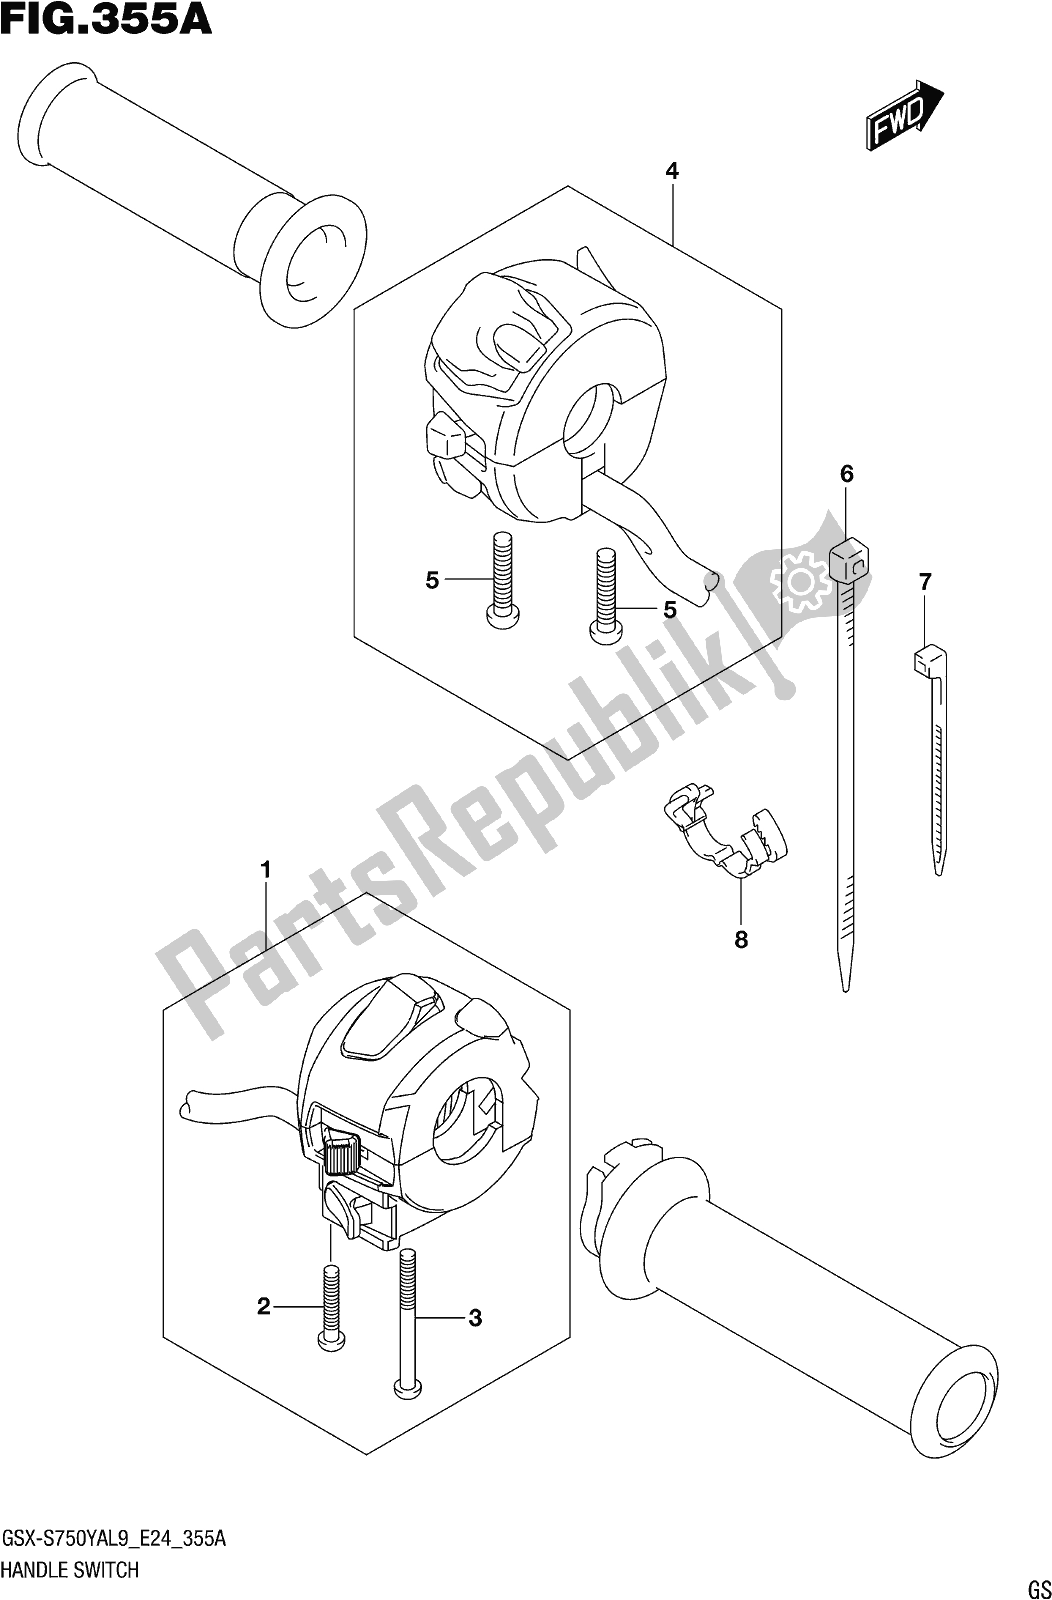 All parts for the Fig. 355a Handle Switch of the Suzuki Gsx-s 750 ZA 2019